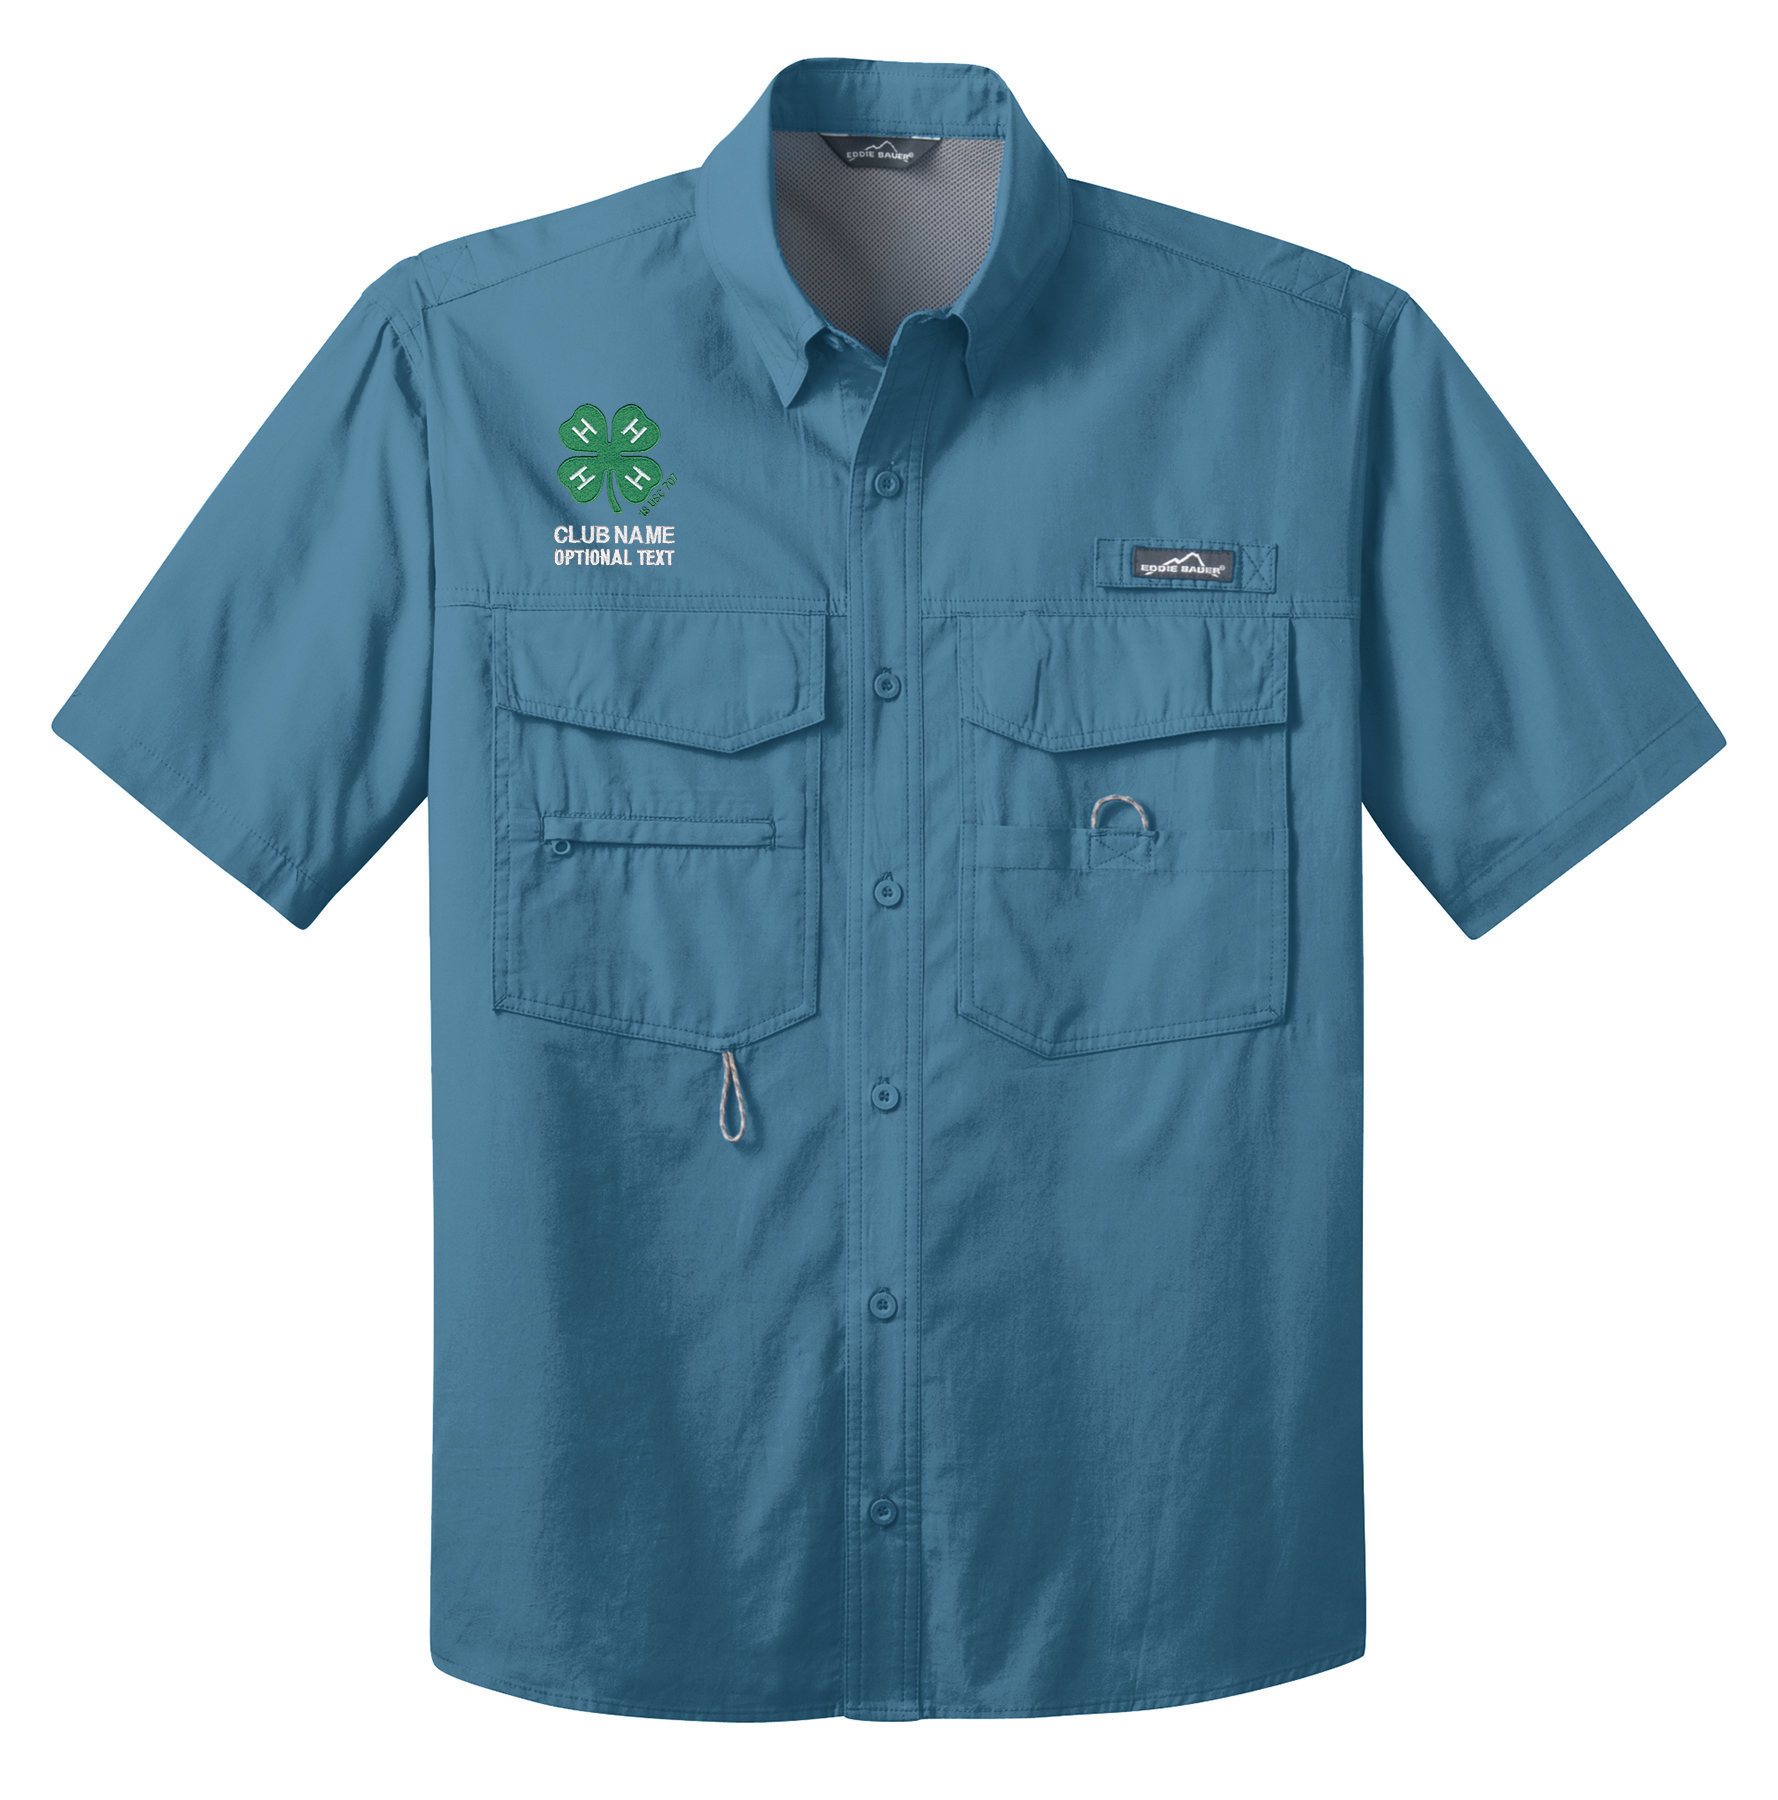 Eddie Bauer – Short Sleeve Fishing Shirt with Embroidered 4-H Logo - Blue Gill, 3X Large